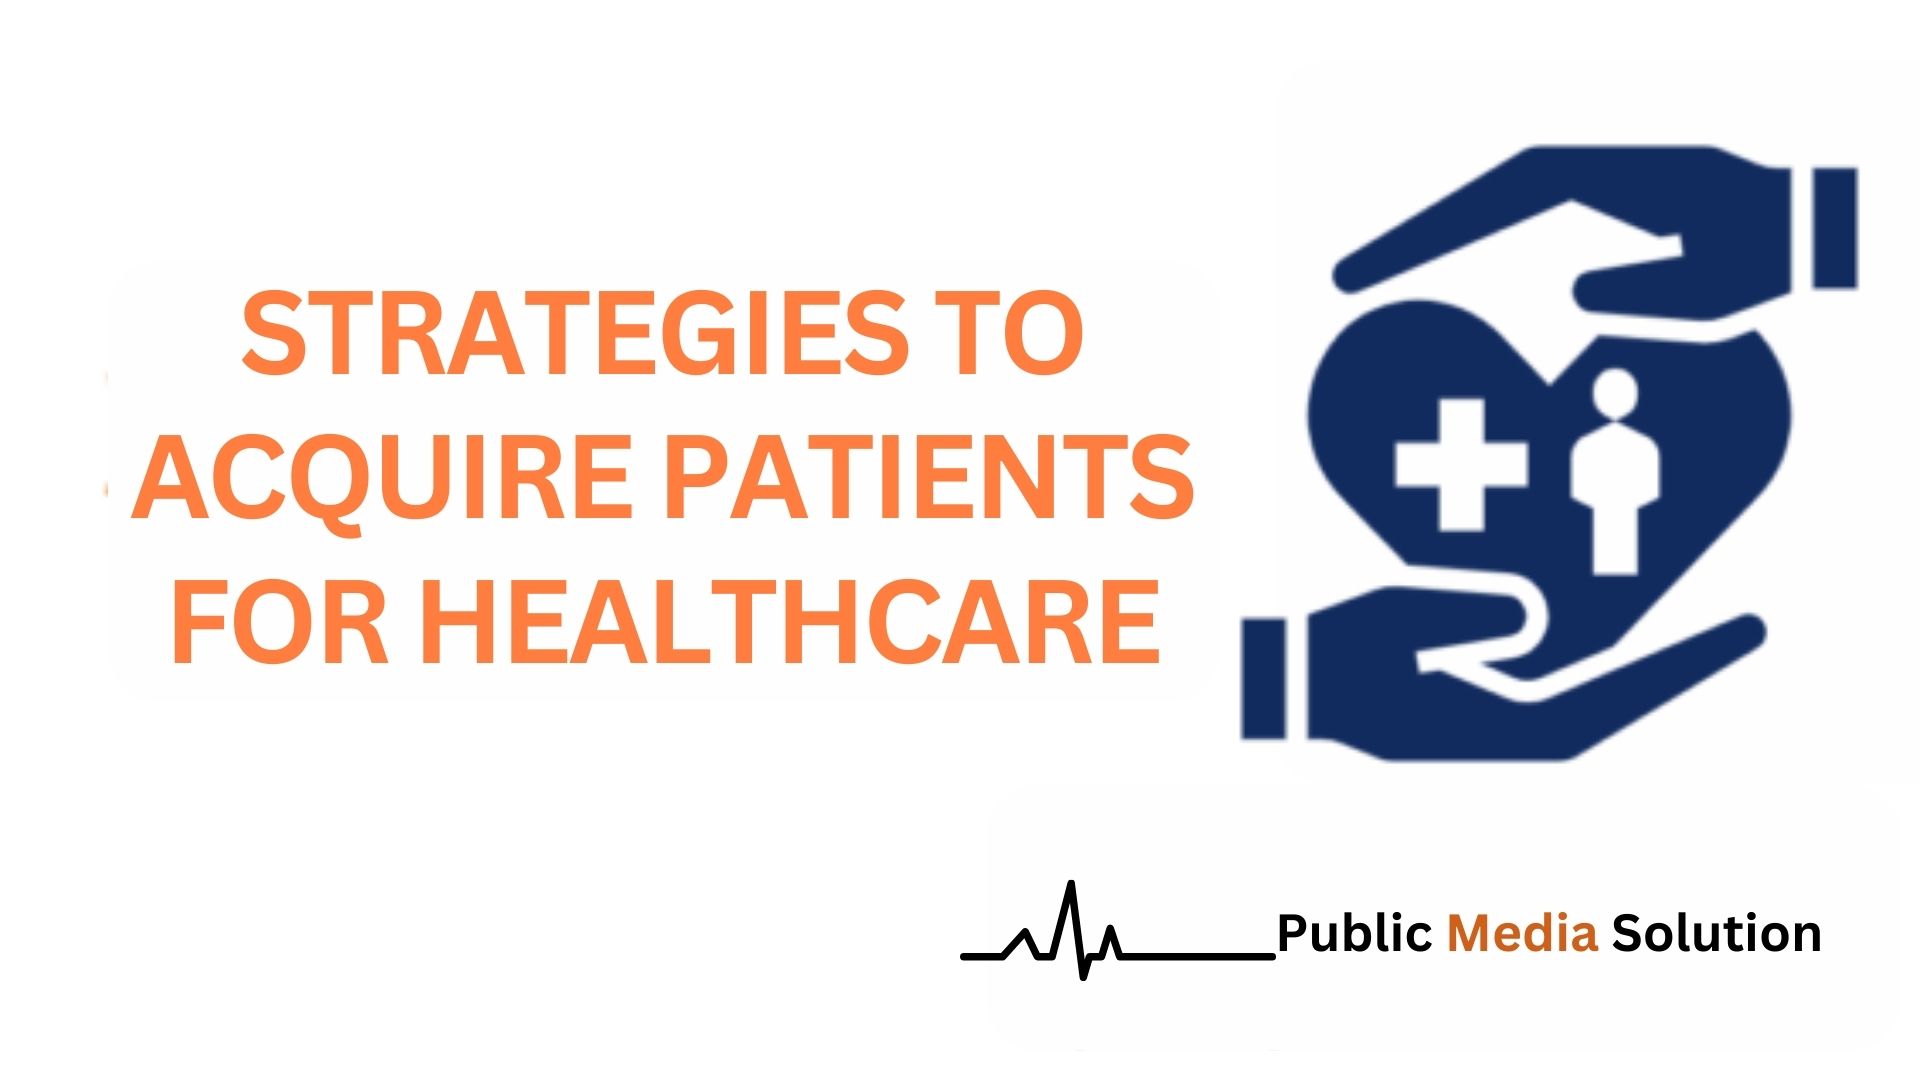 Strategies to Acquire Patients for Healthcare